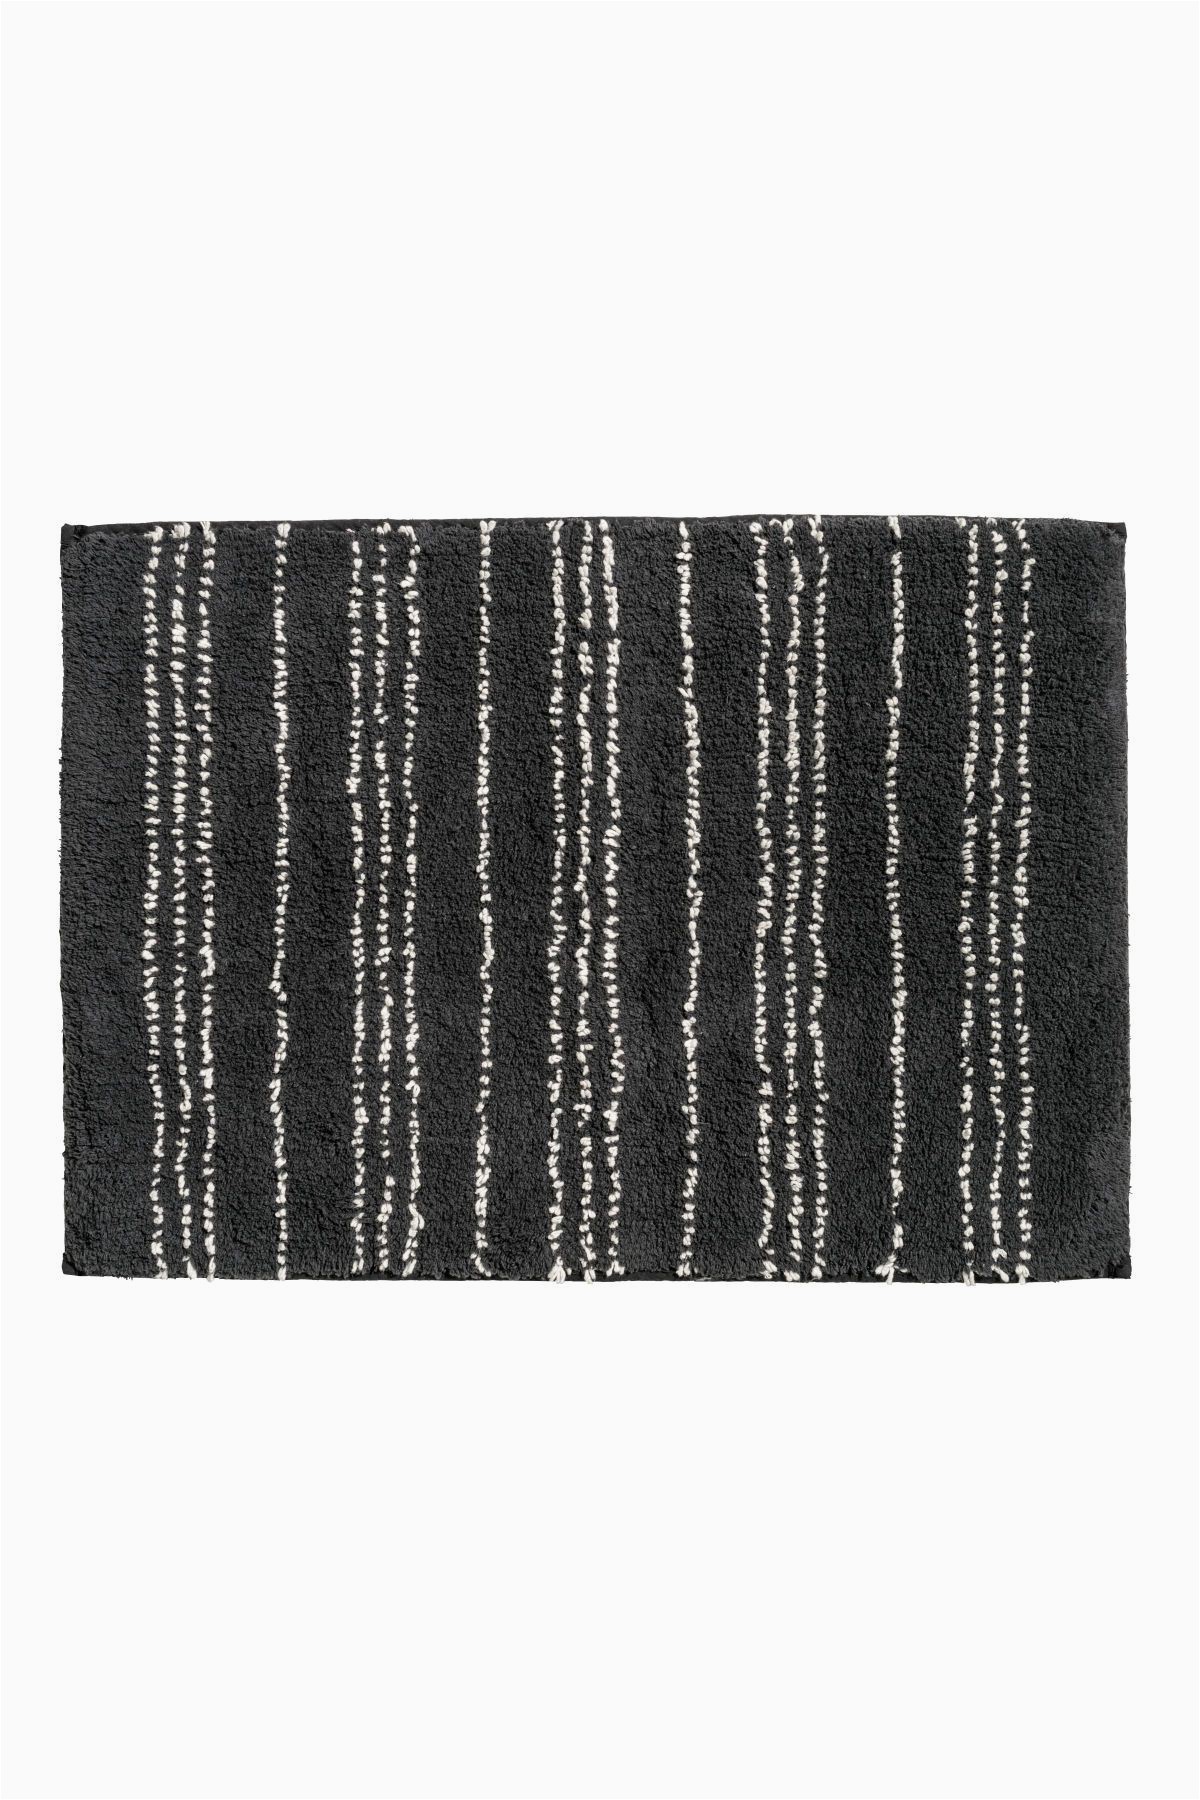 Charcoal Grey Bath Rugs Charcoal Gray White Patterned Rectangular Bath Mat In